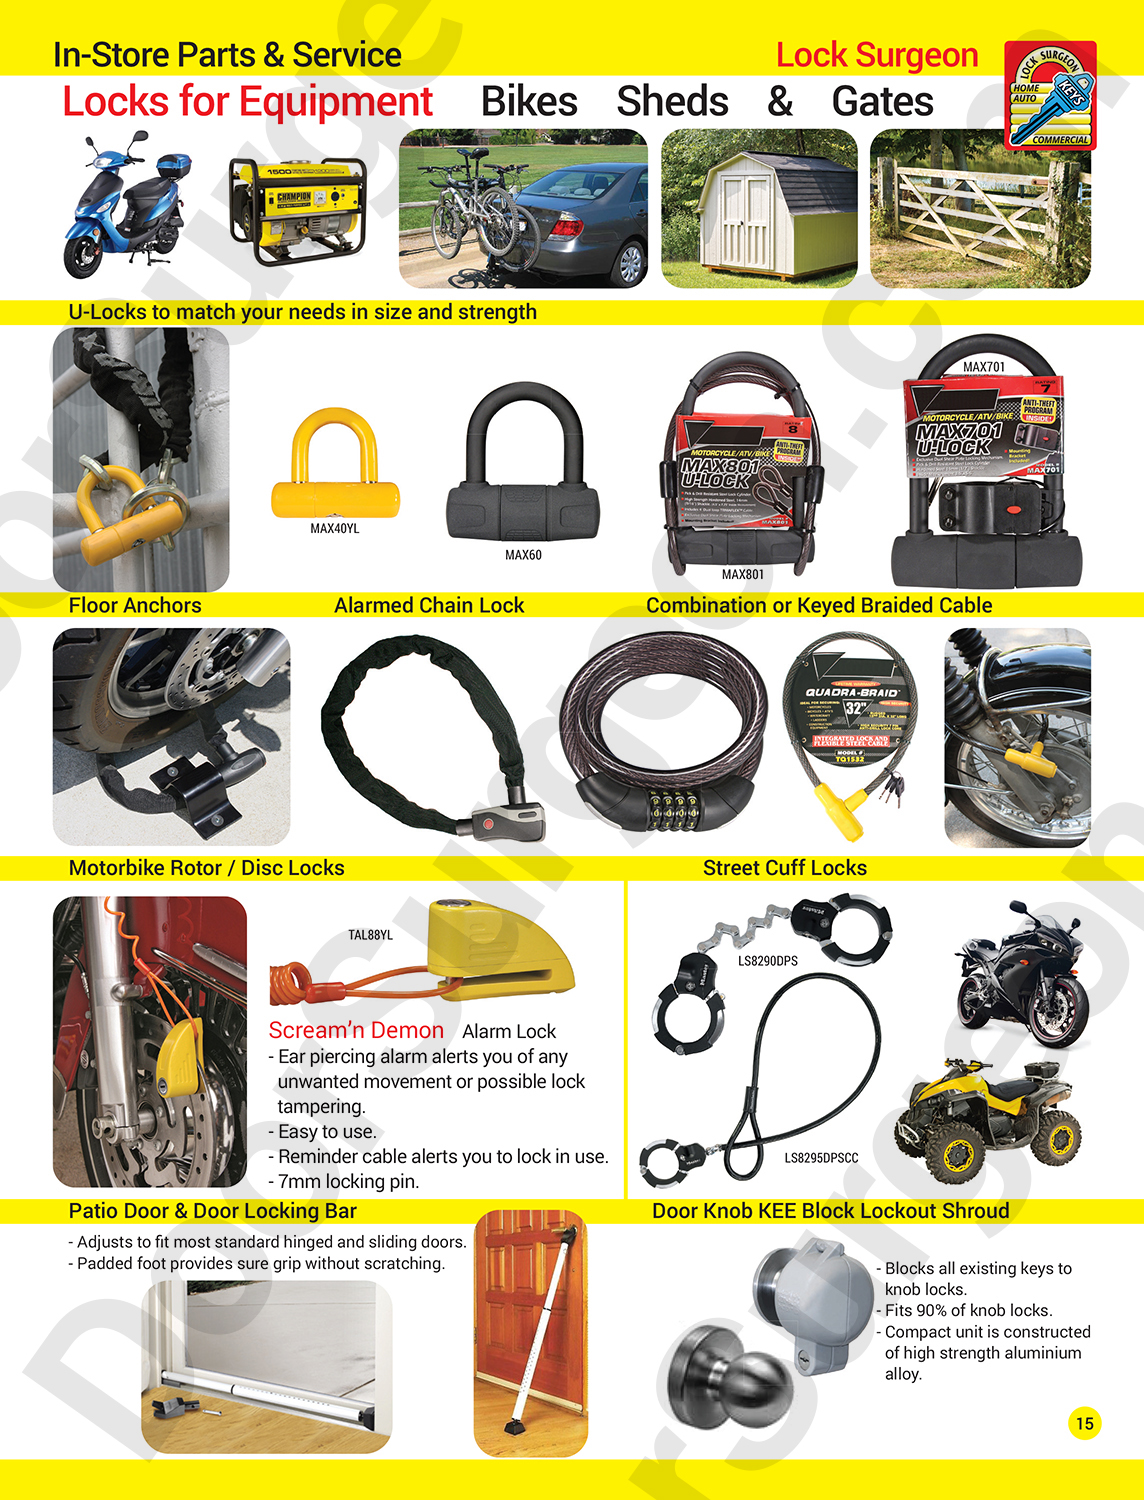 Locks for equipment. In-store parts and service. U-Locks to match your needs in size and strength.